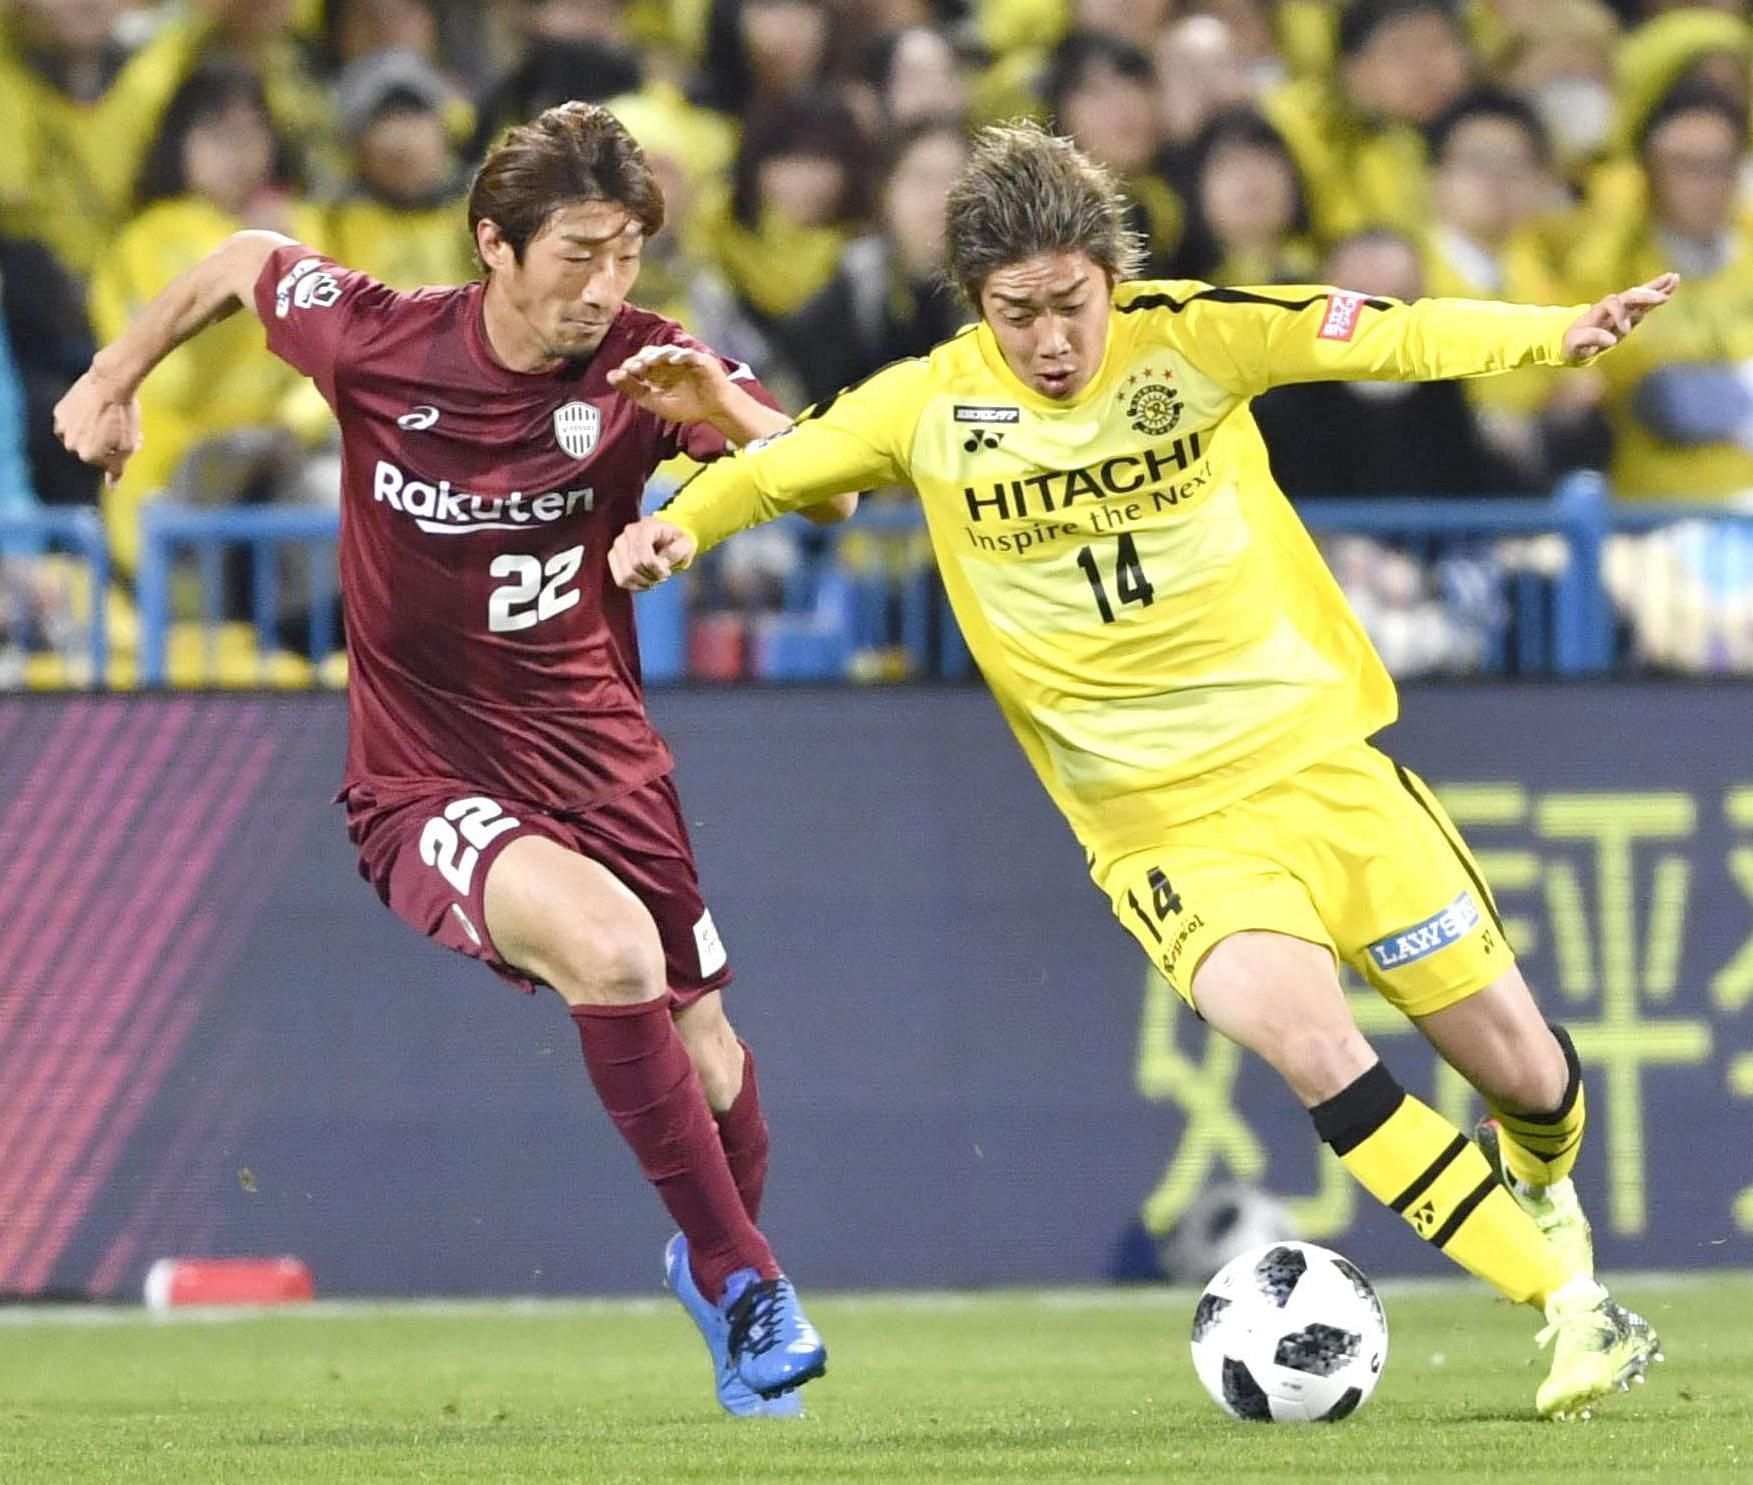 Kashiwa Reysols face Cerezo Osaka in their upcoming J1 League fixture on Tuesday